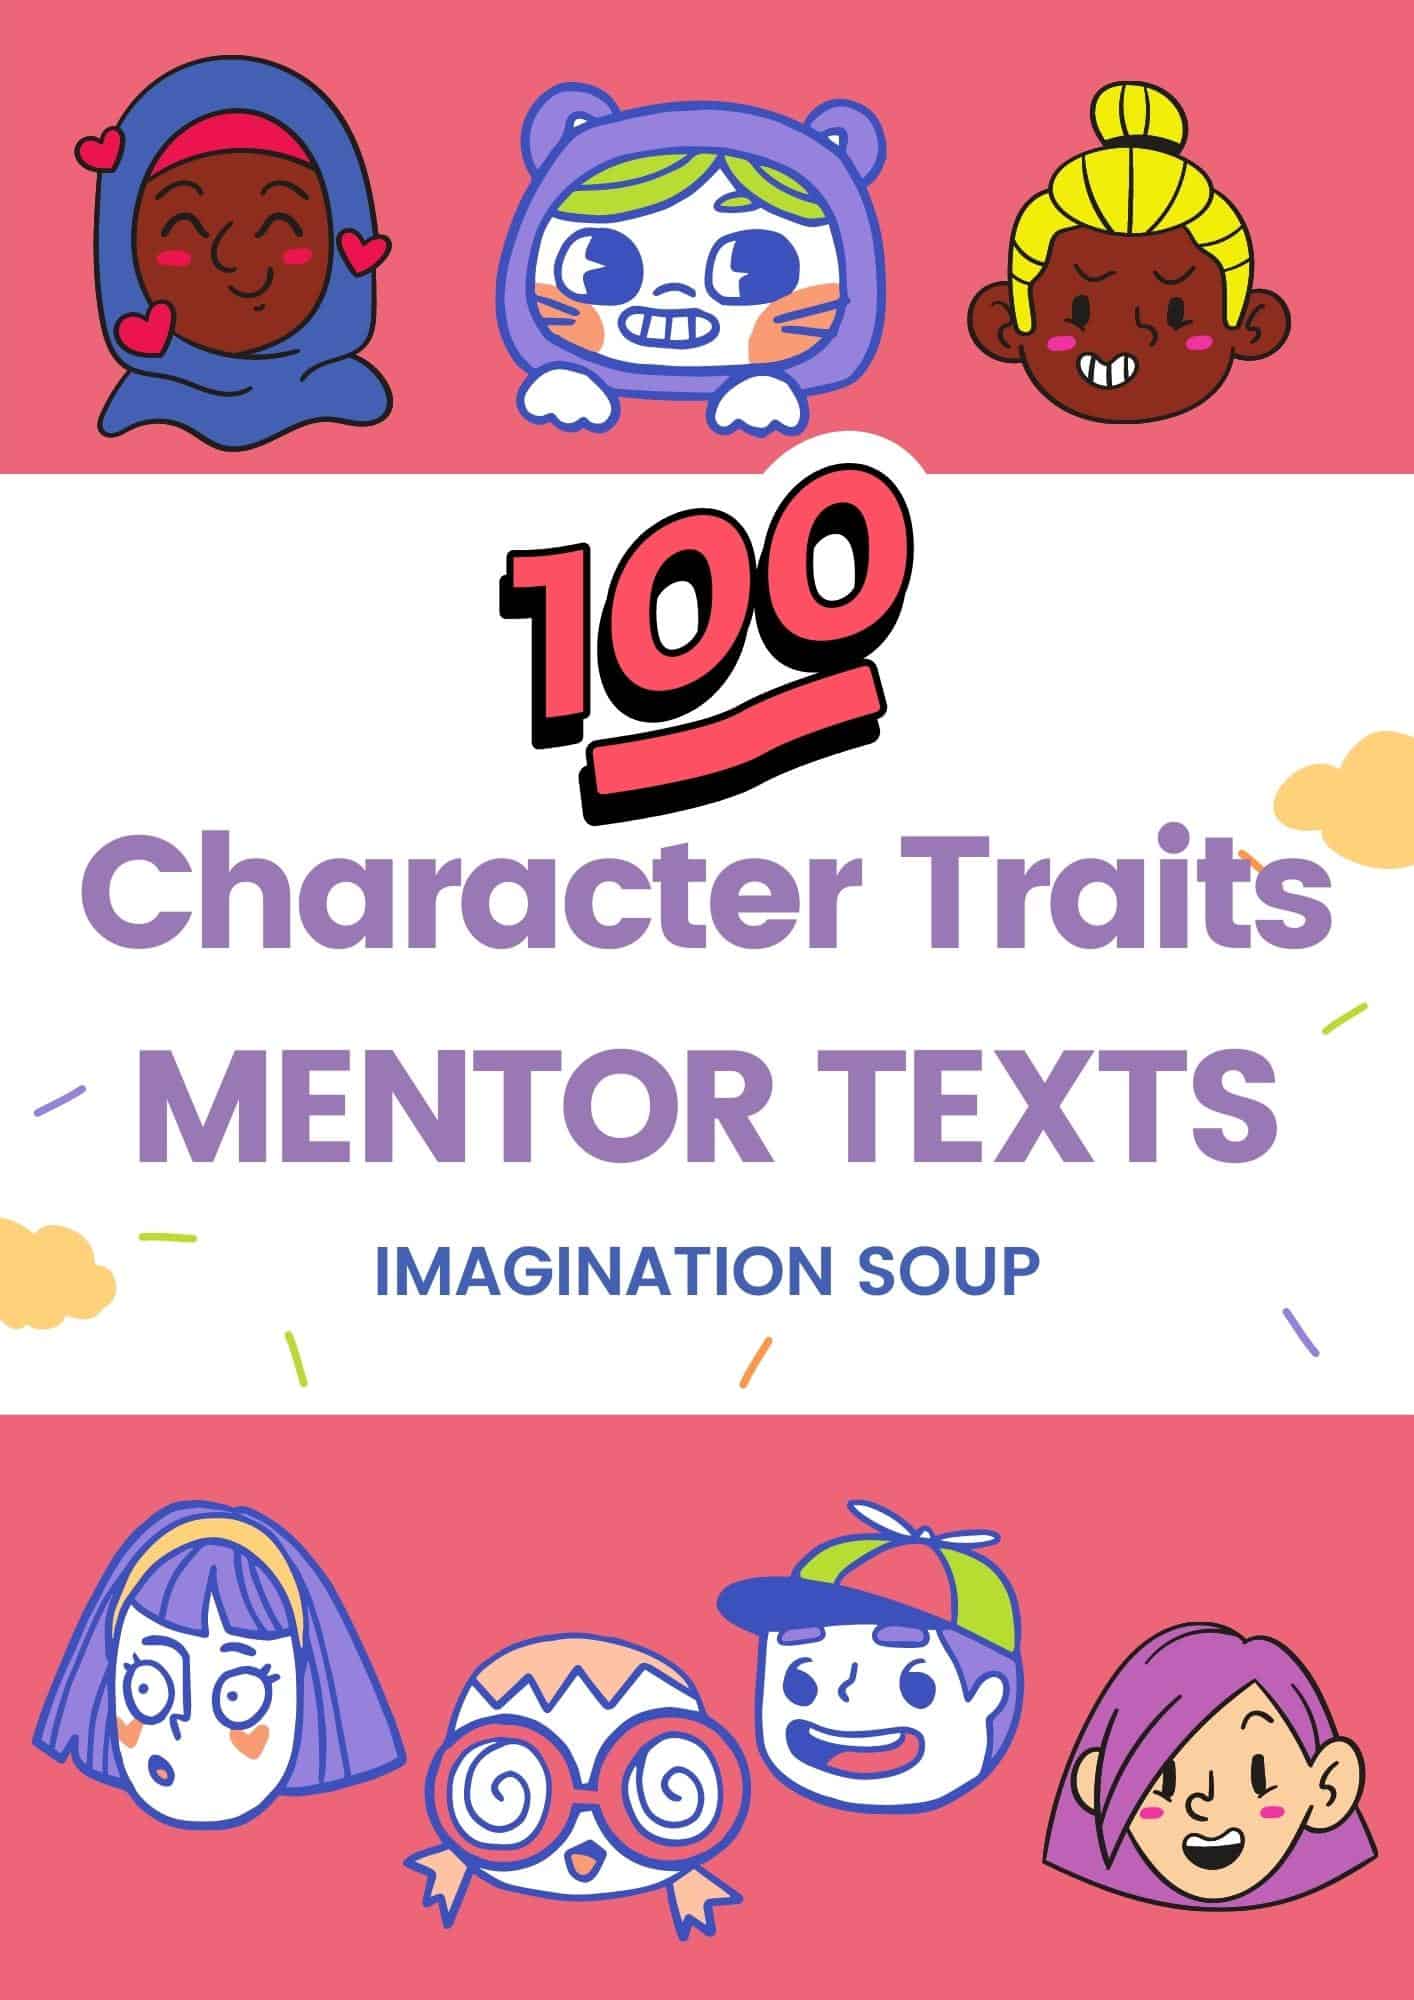 Character traits mentor texts for all ages